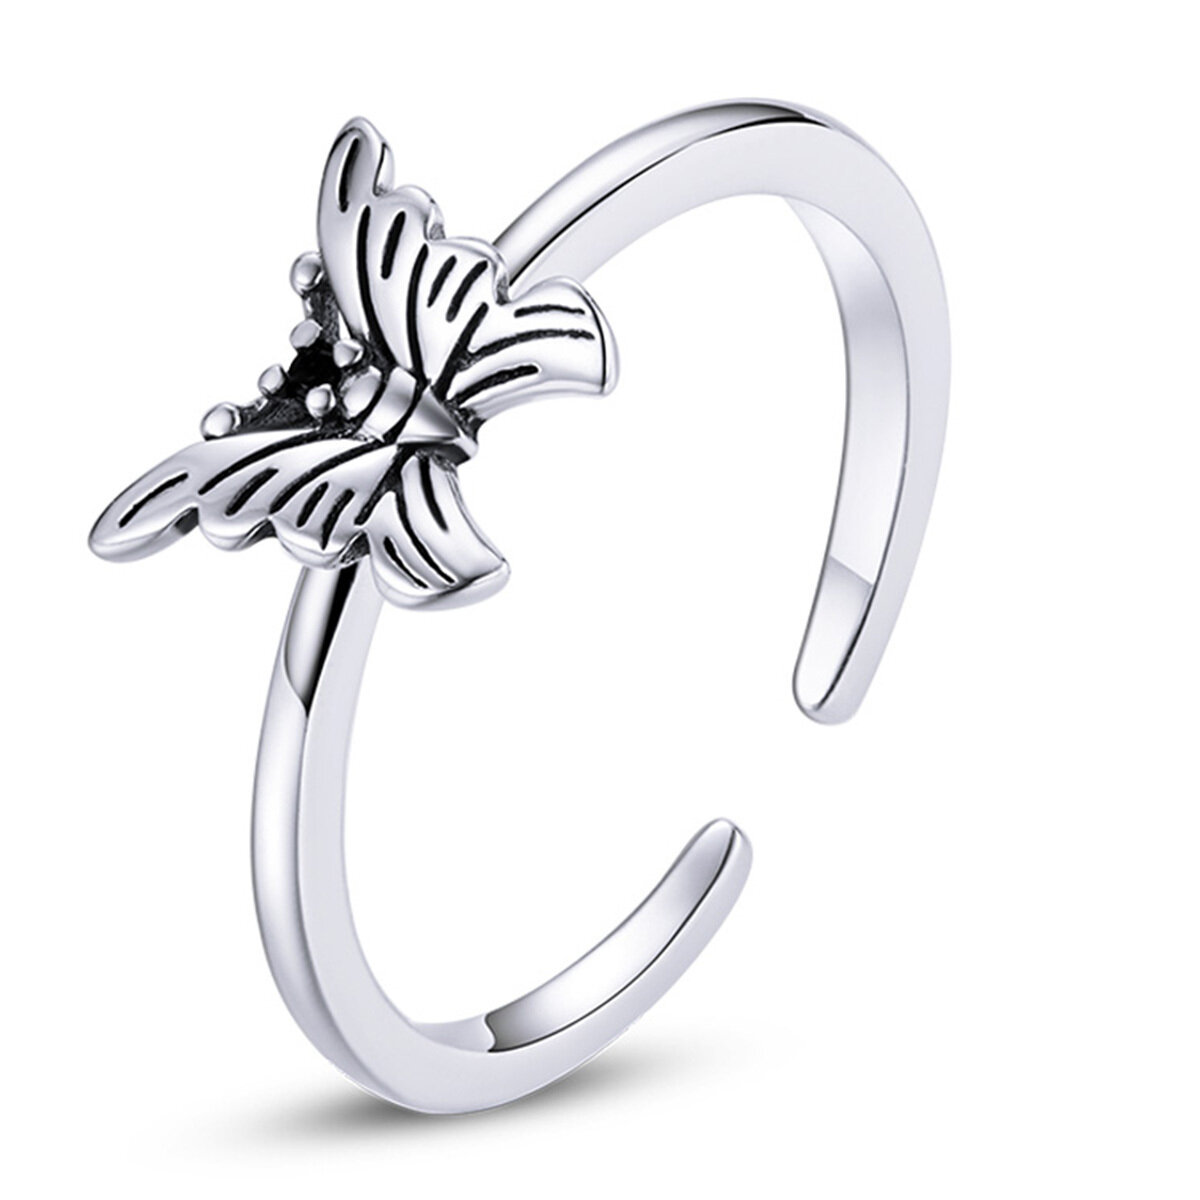 GemKing BSR195 Swallowtail butterfly S925 Sterling Silver Ring